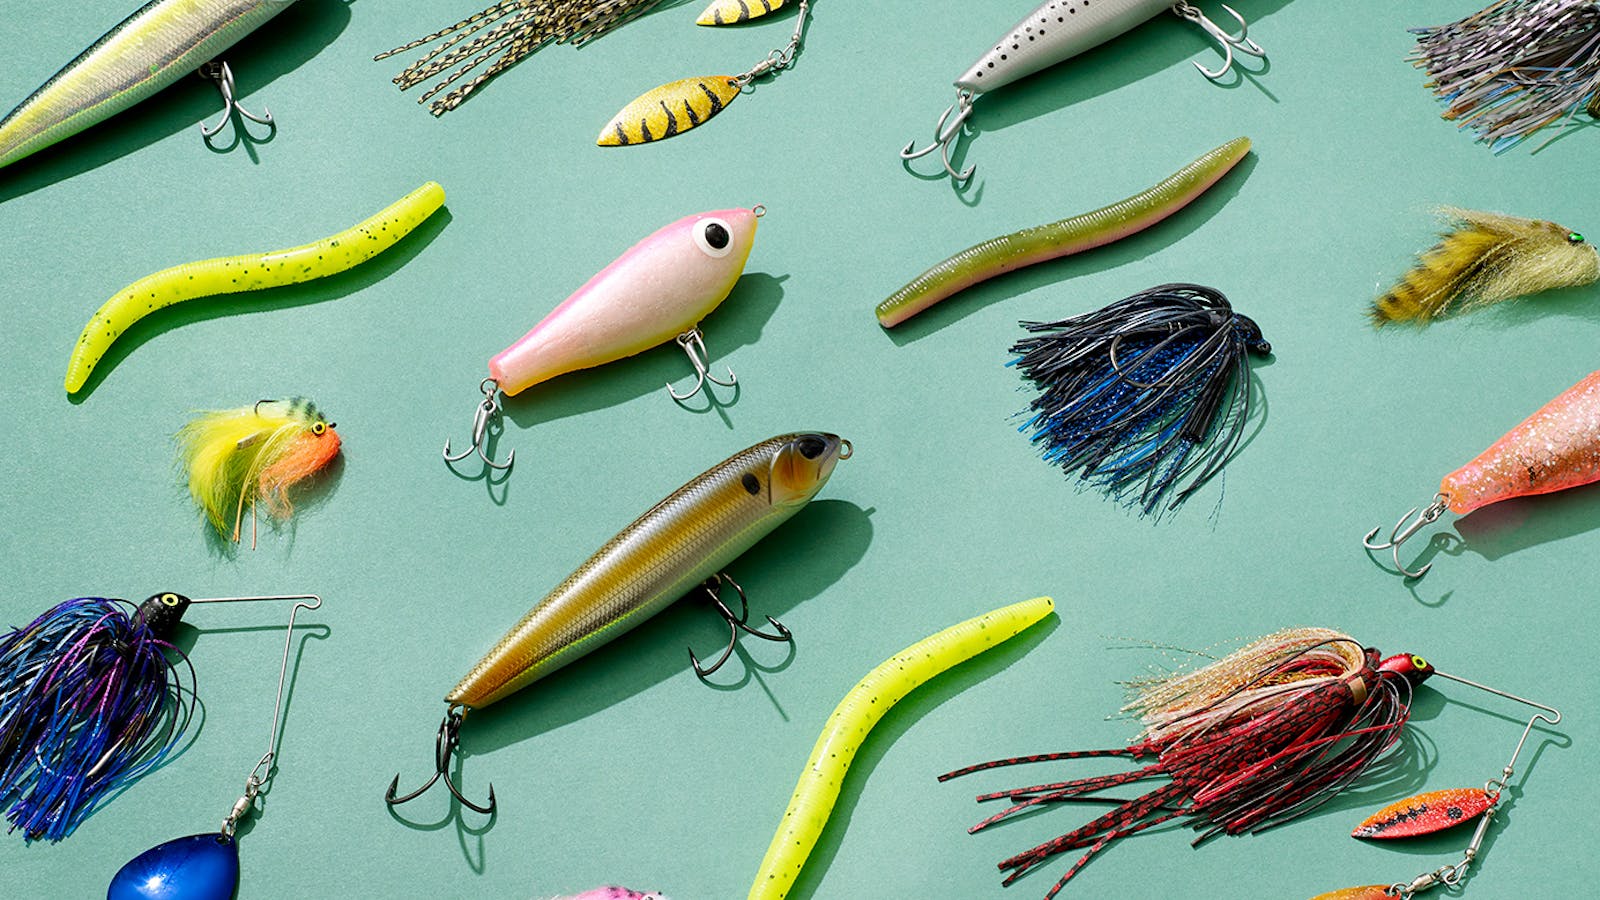 The Top 5 Fishing Lures Of All Time (Inshore Edition)